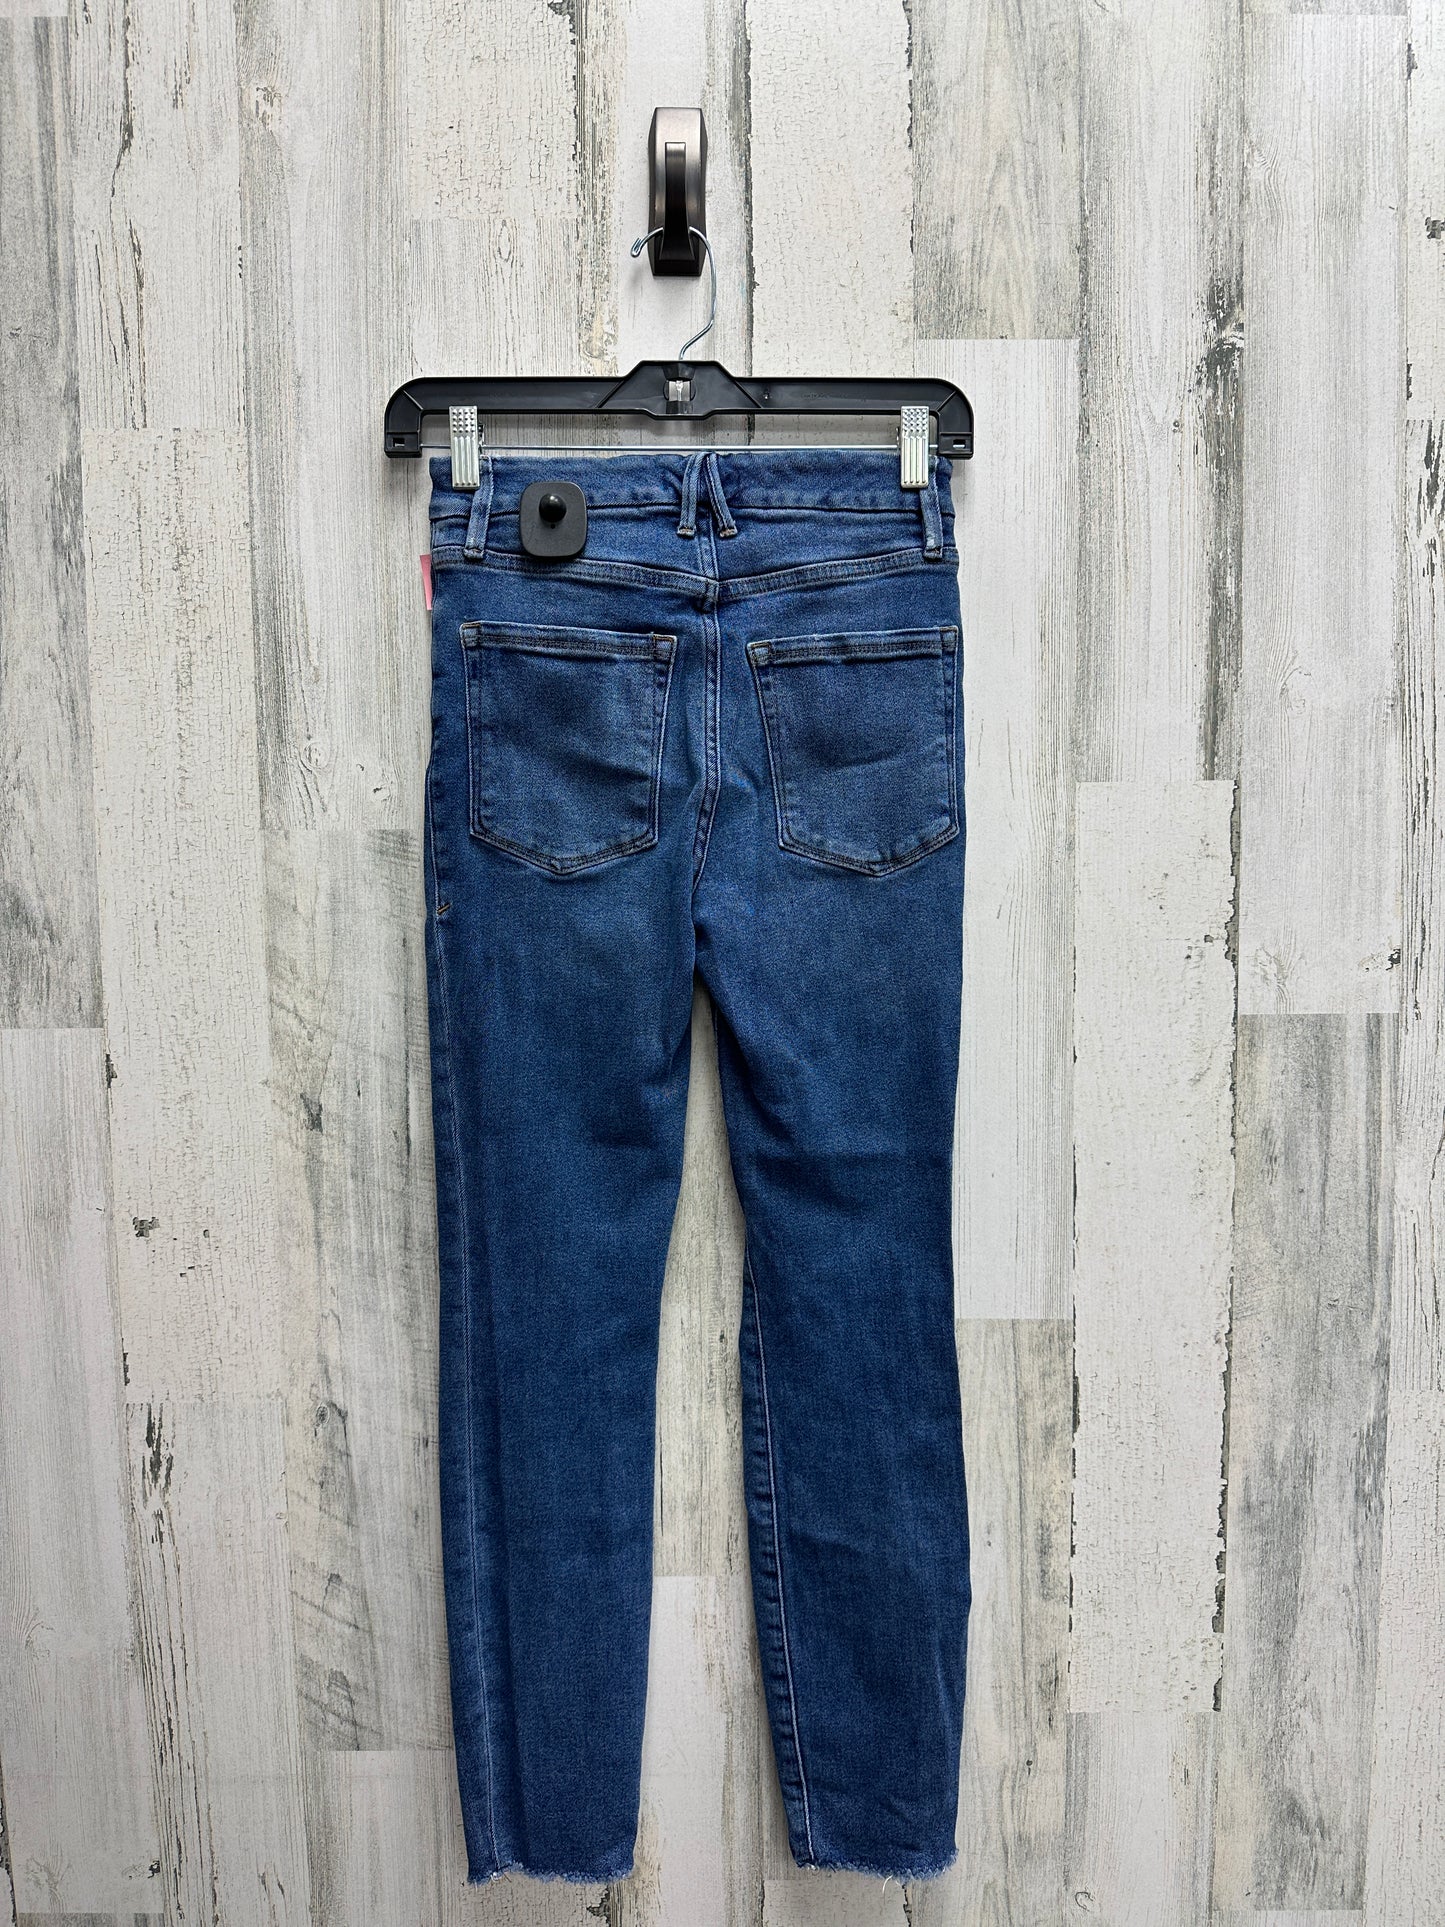 Jeans Skinny By Good American  Size: 26